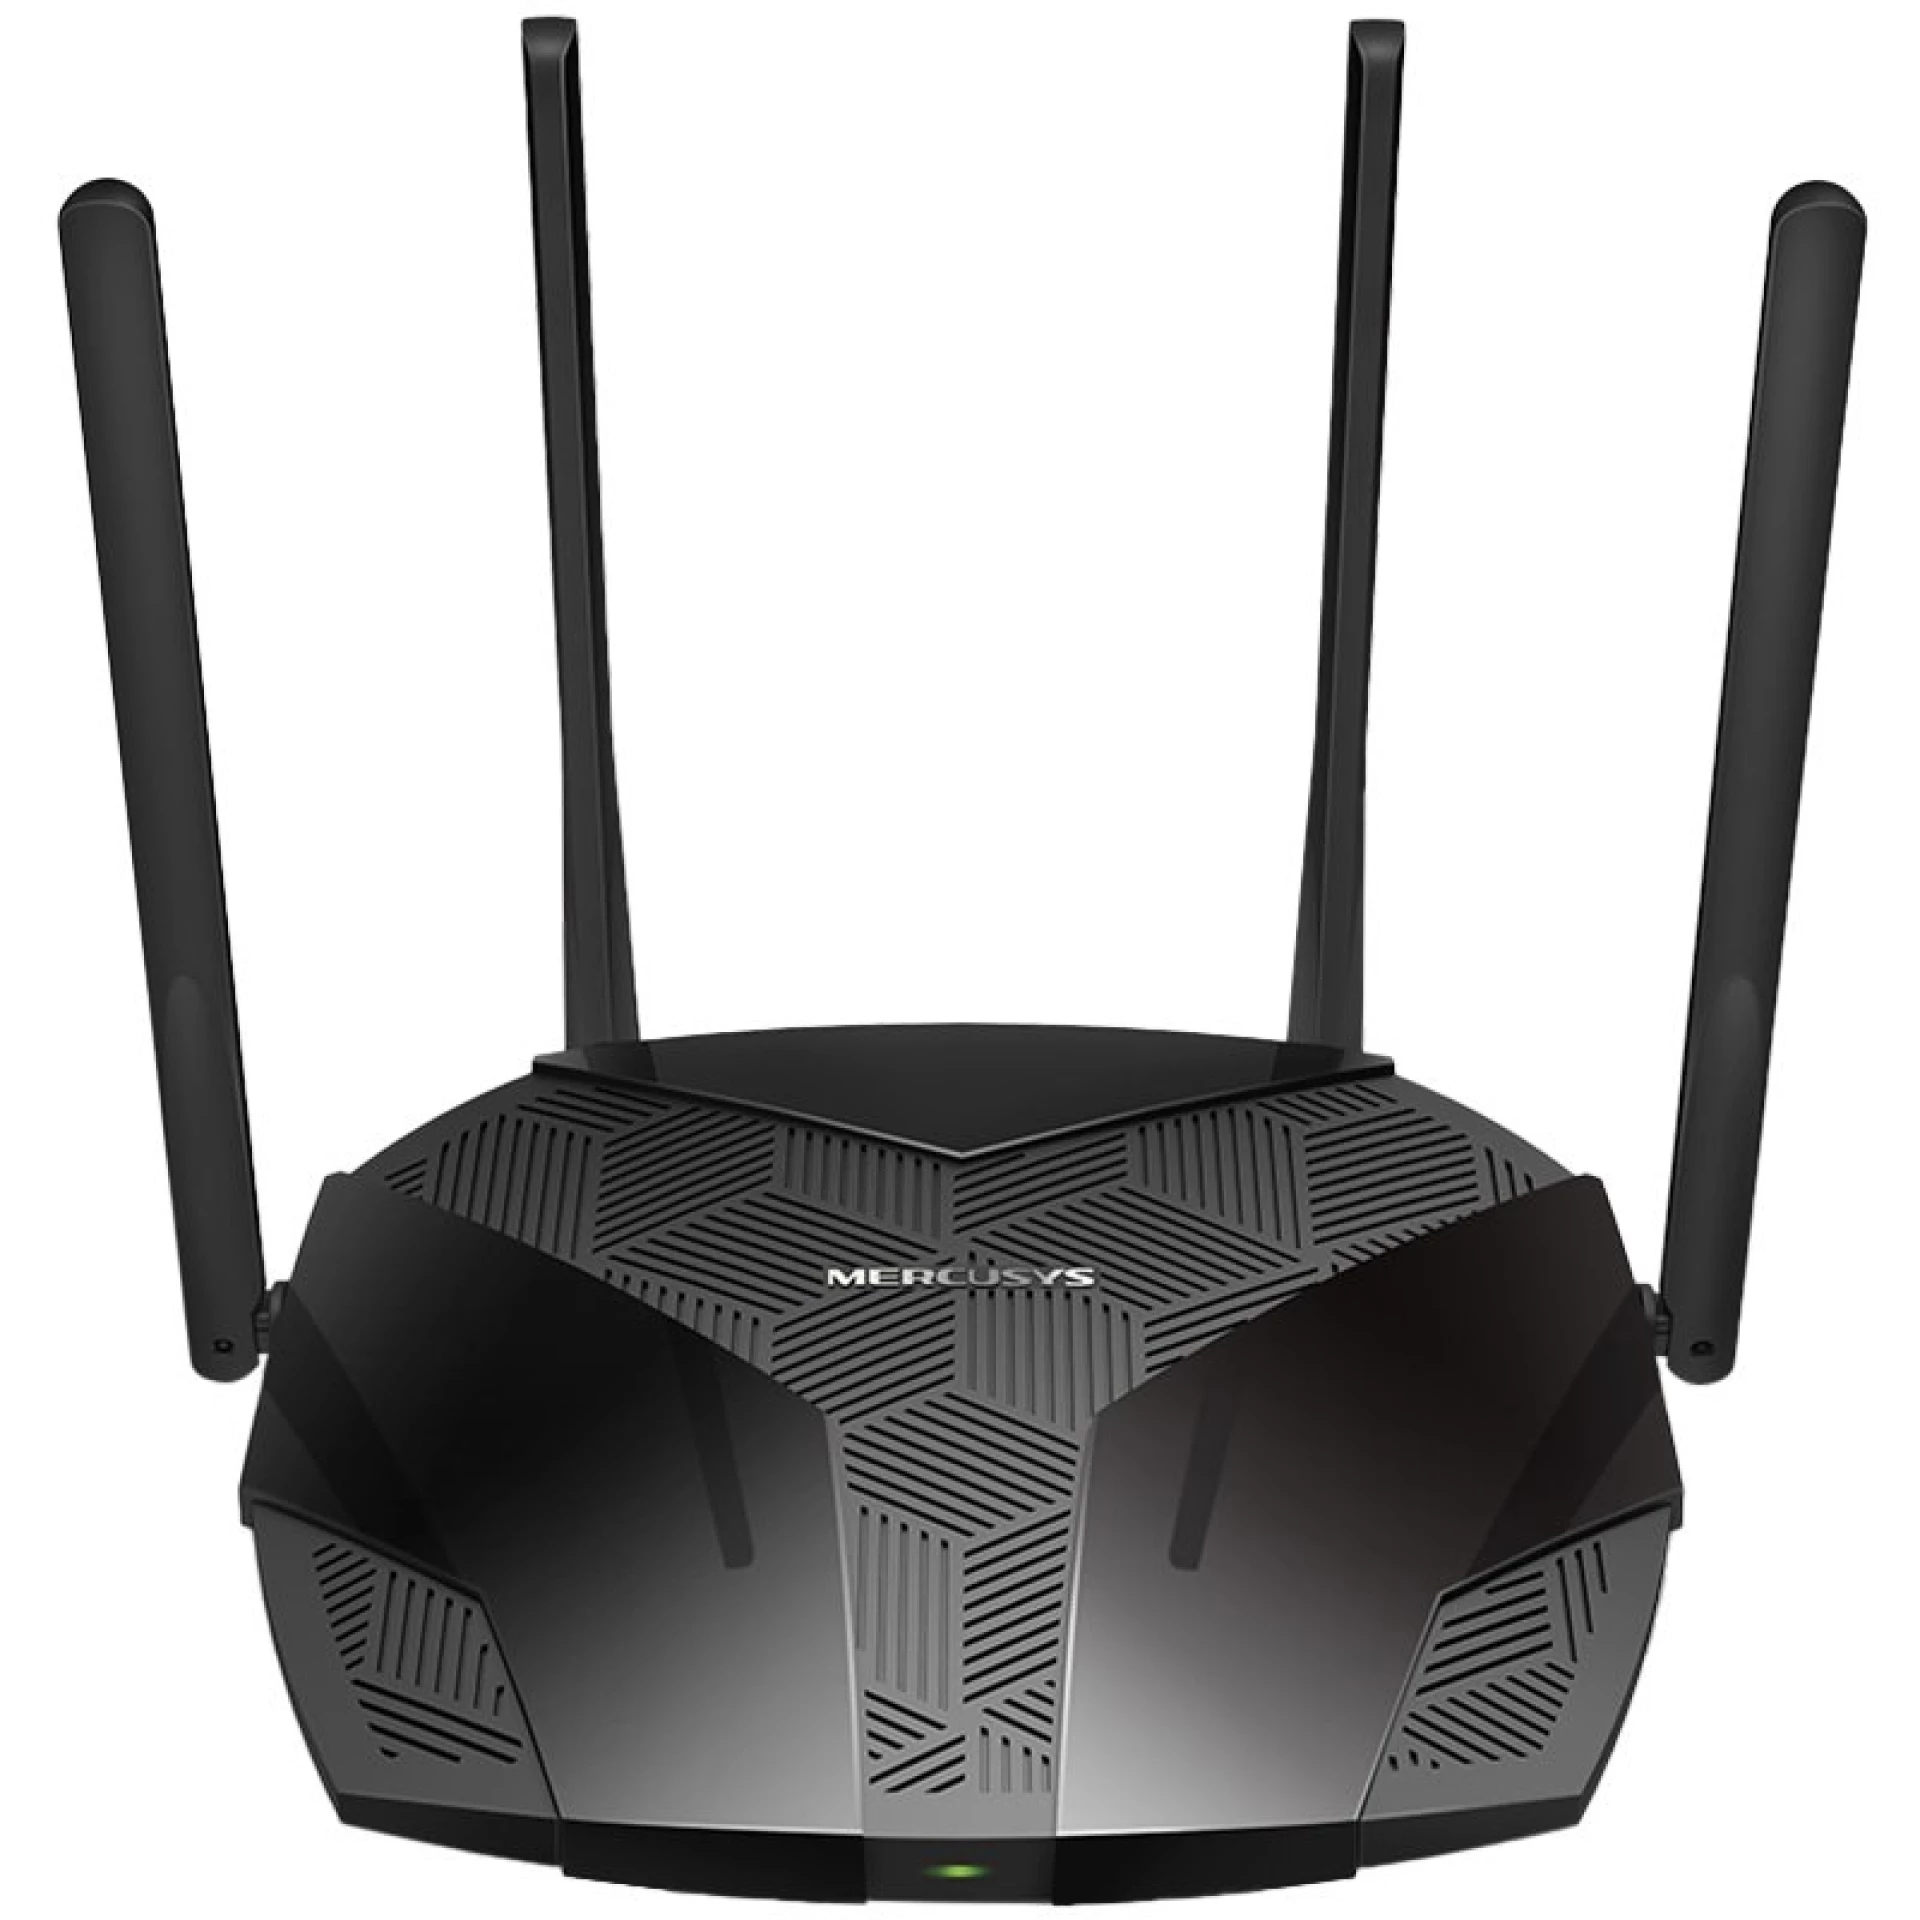 Mercusys MR70X AX1800 Dual-Band WiFi 6 Router, 574 Mbps at 2.4 GHz + 1201 Mbps at 5 GHz,  4× Fixed External Antennas, 3× Gigabit LAN Ports, 1× Gigabit WAN Port, 1024-QAM, OFDMA, Router/Access Point Mode, MU-MIMO, WPA3, TWT, BSS Color